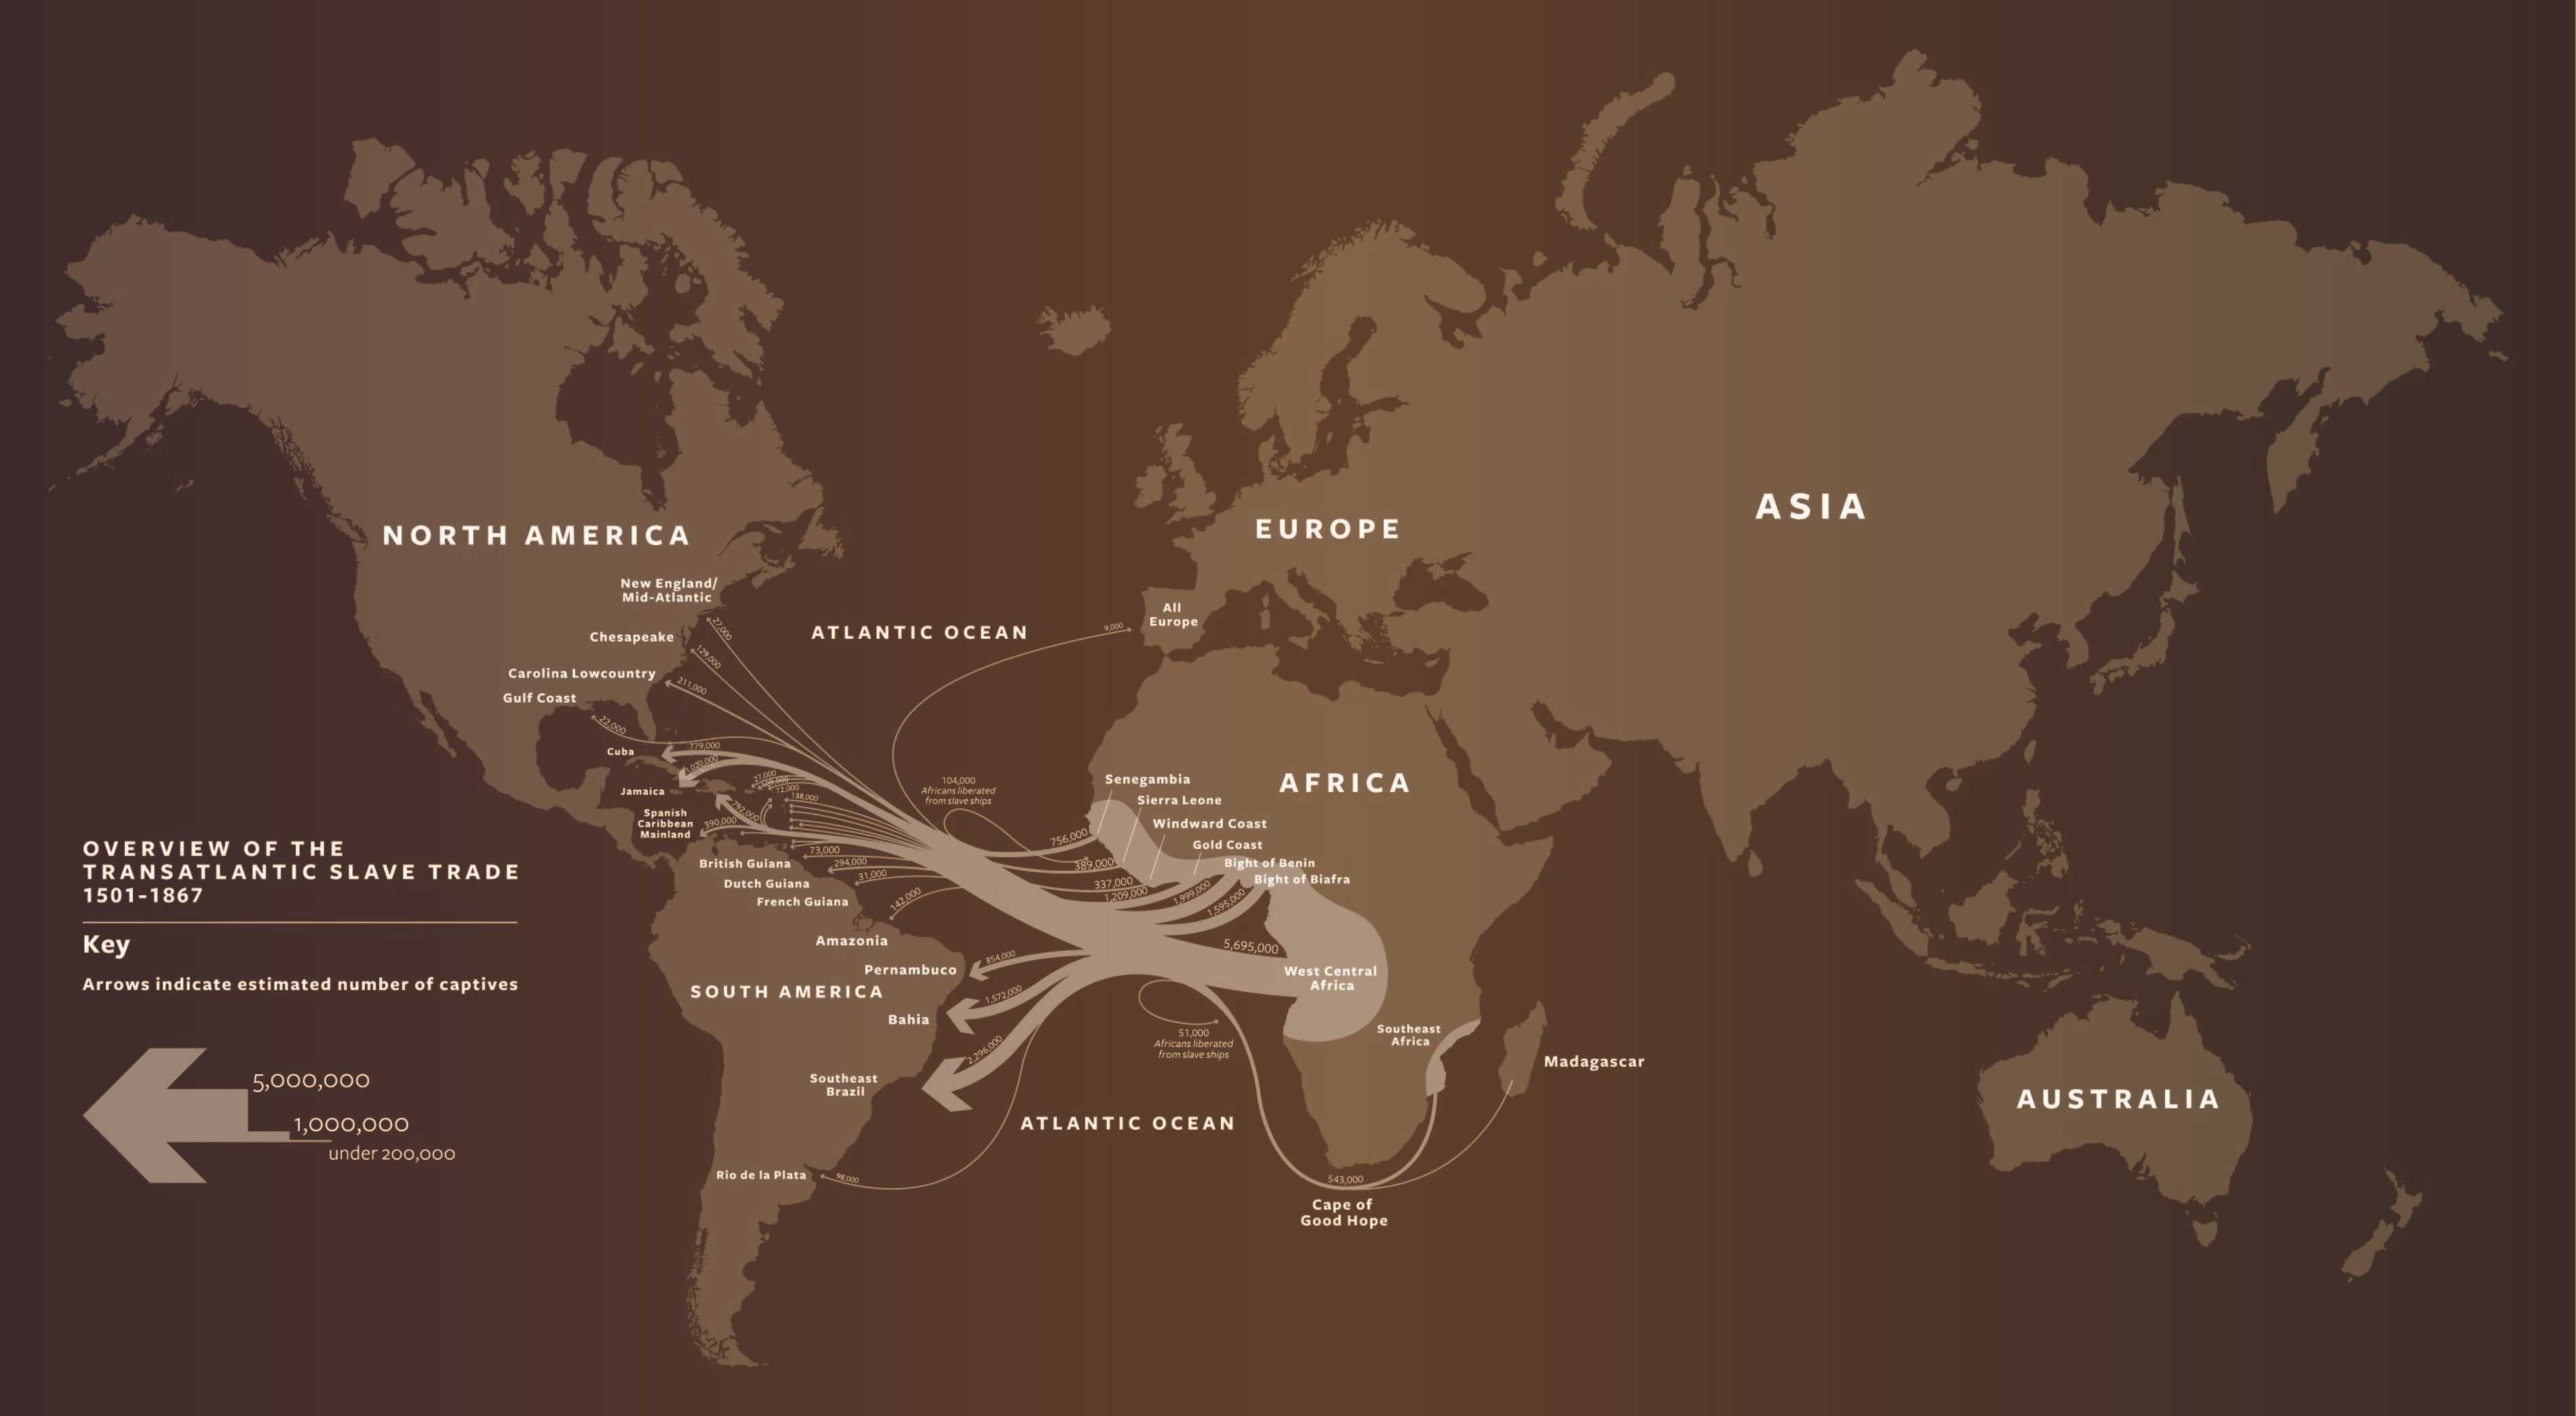 Map showing the Overview of the Atlantic Slave Trade, 1501 - 1867